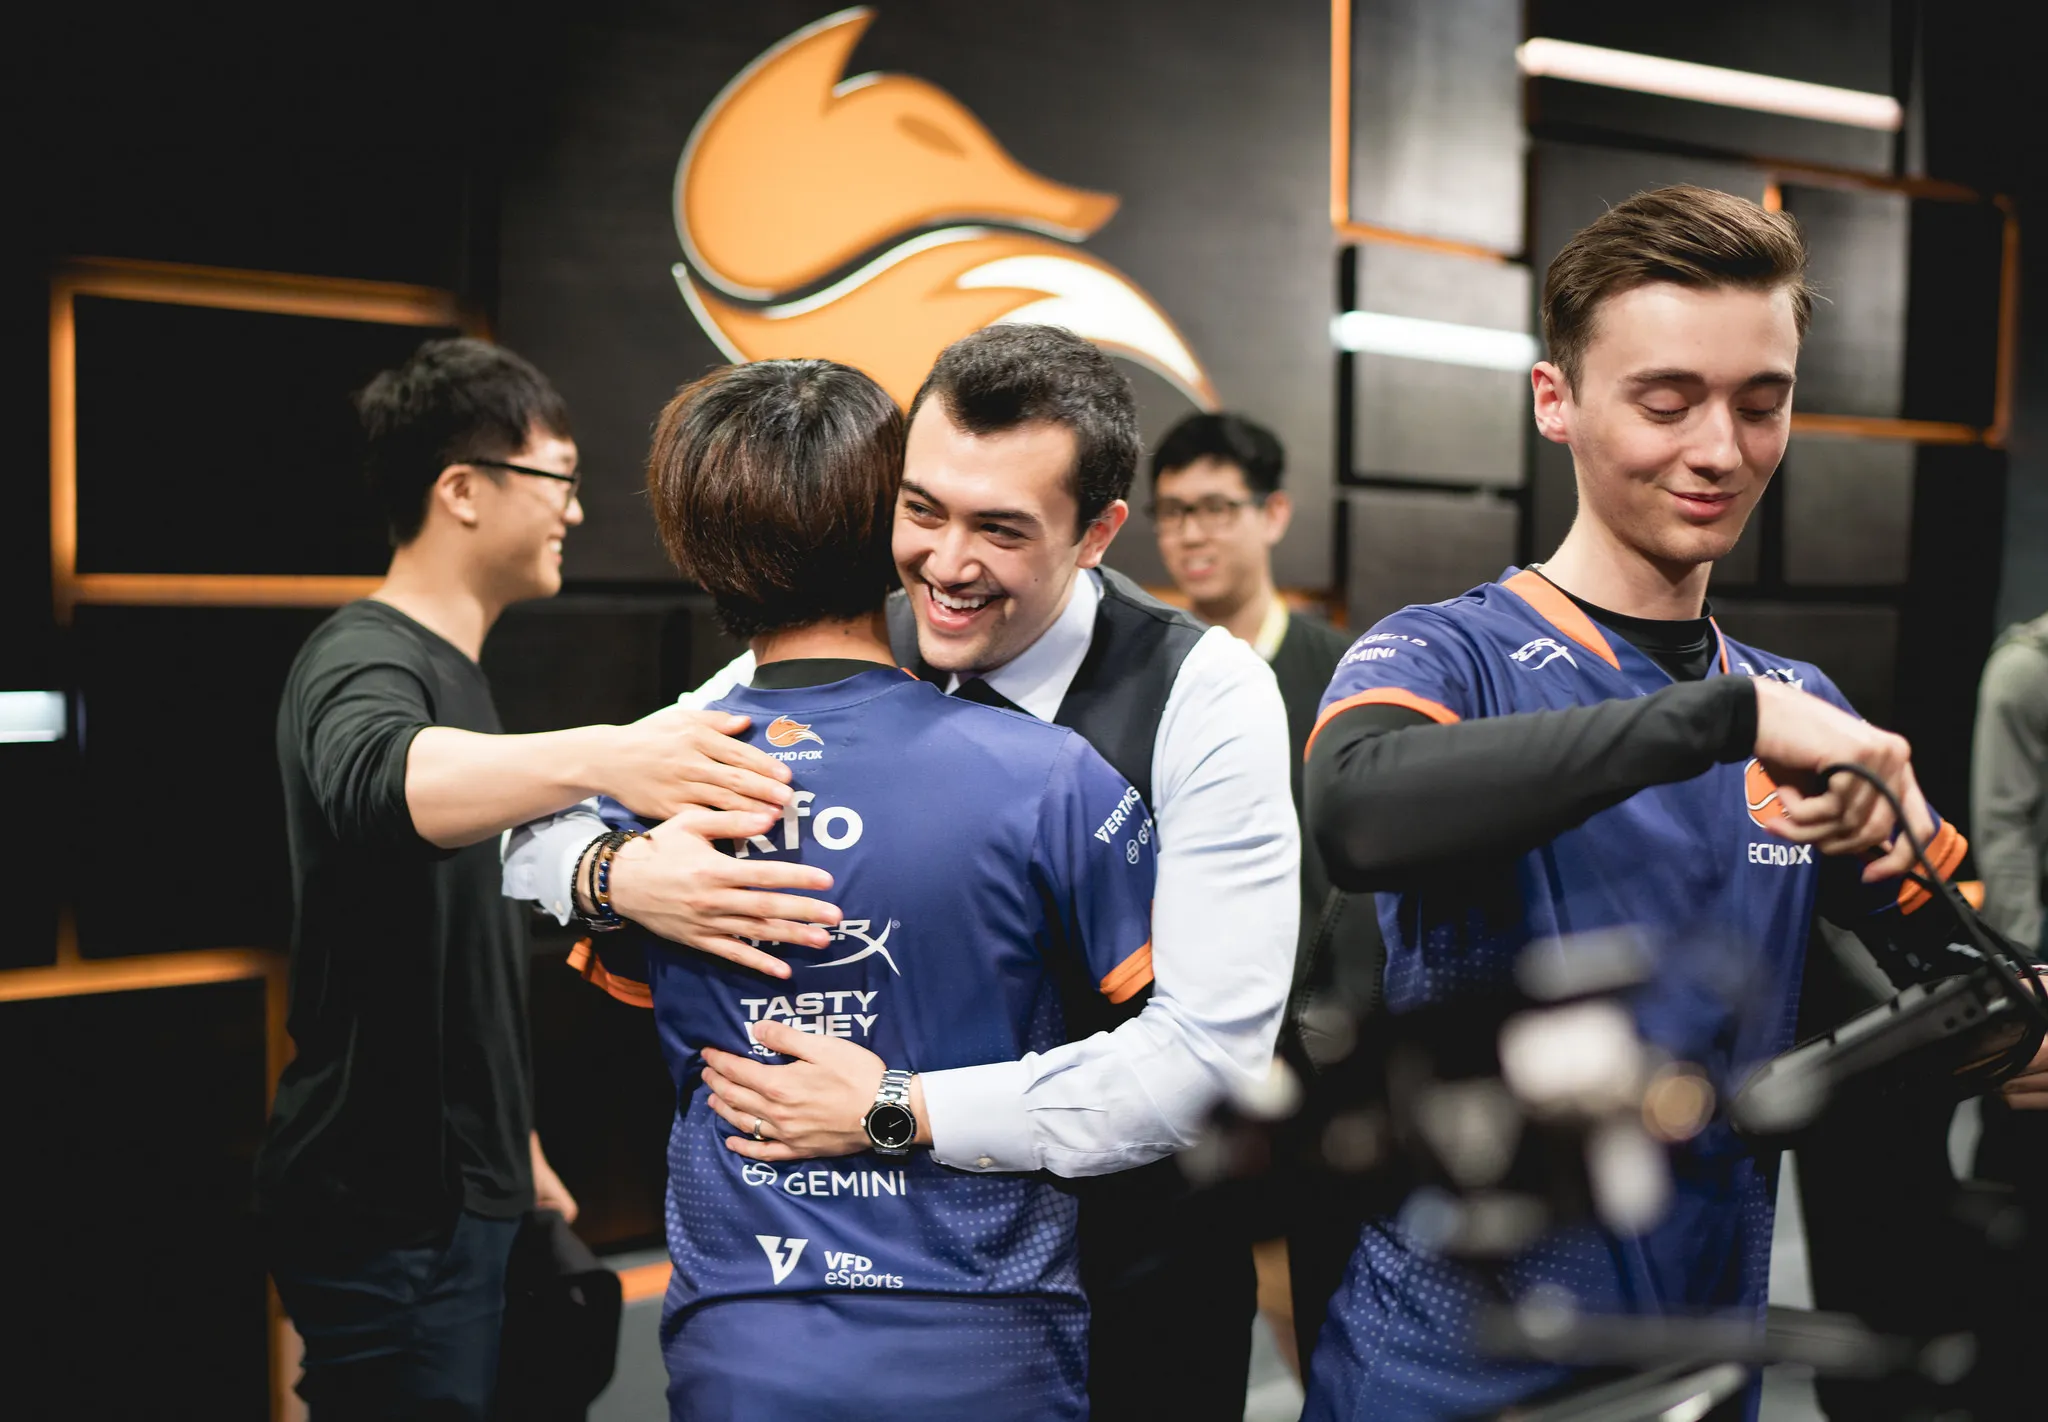 Echo Fox Archives - Page 2 of 15 - Dot Esports